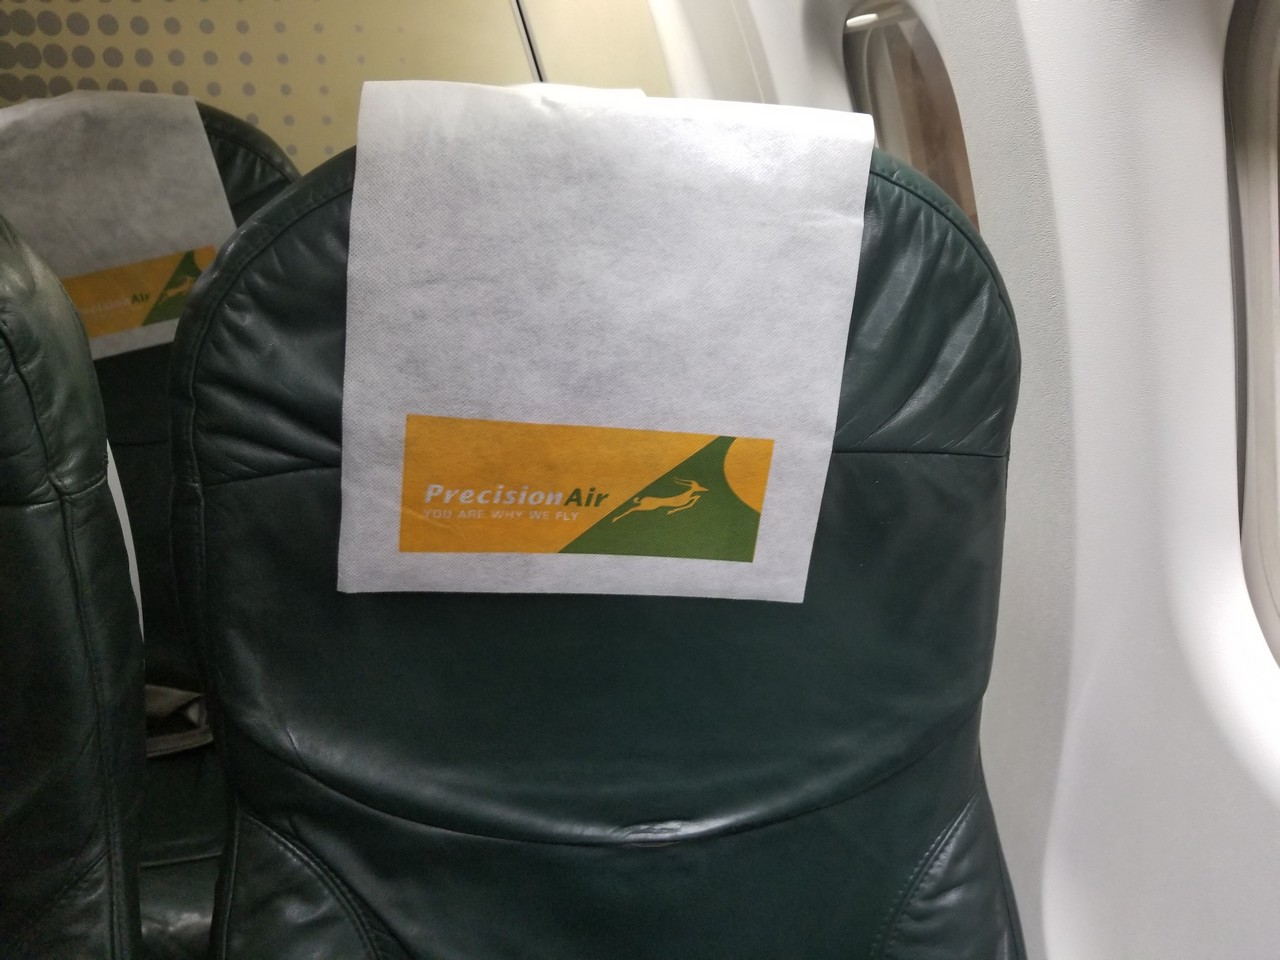 a white paper on a seat